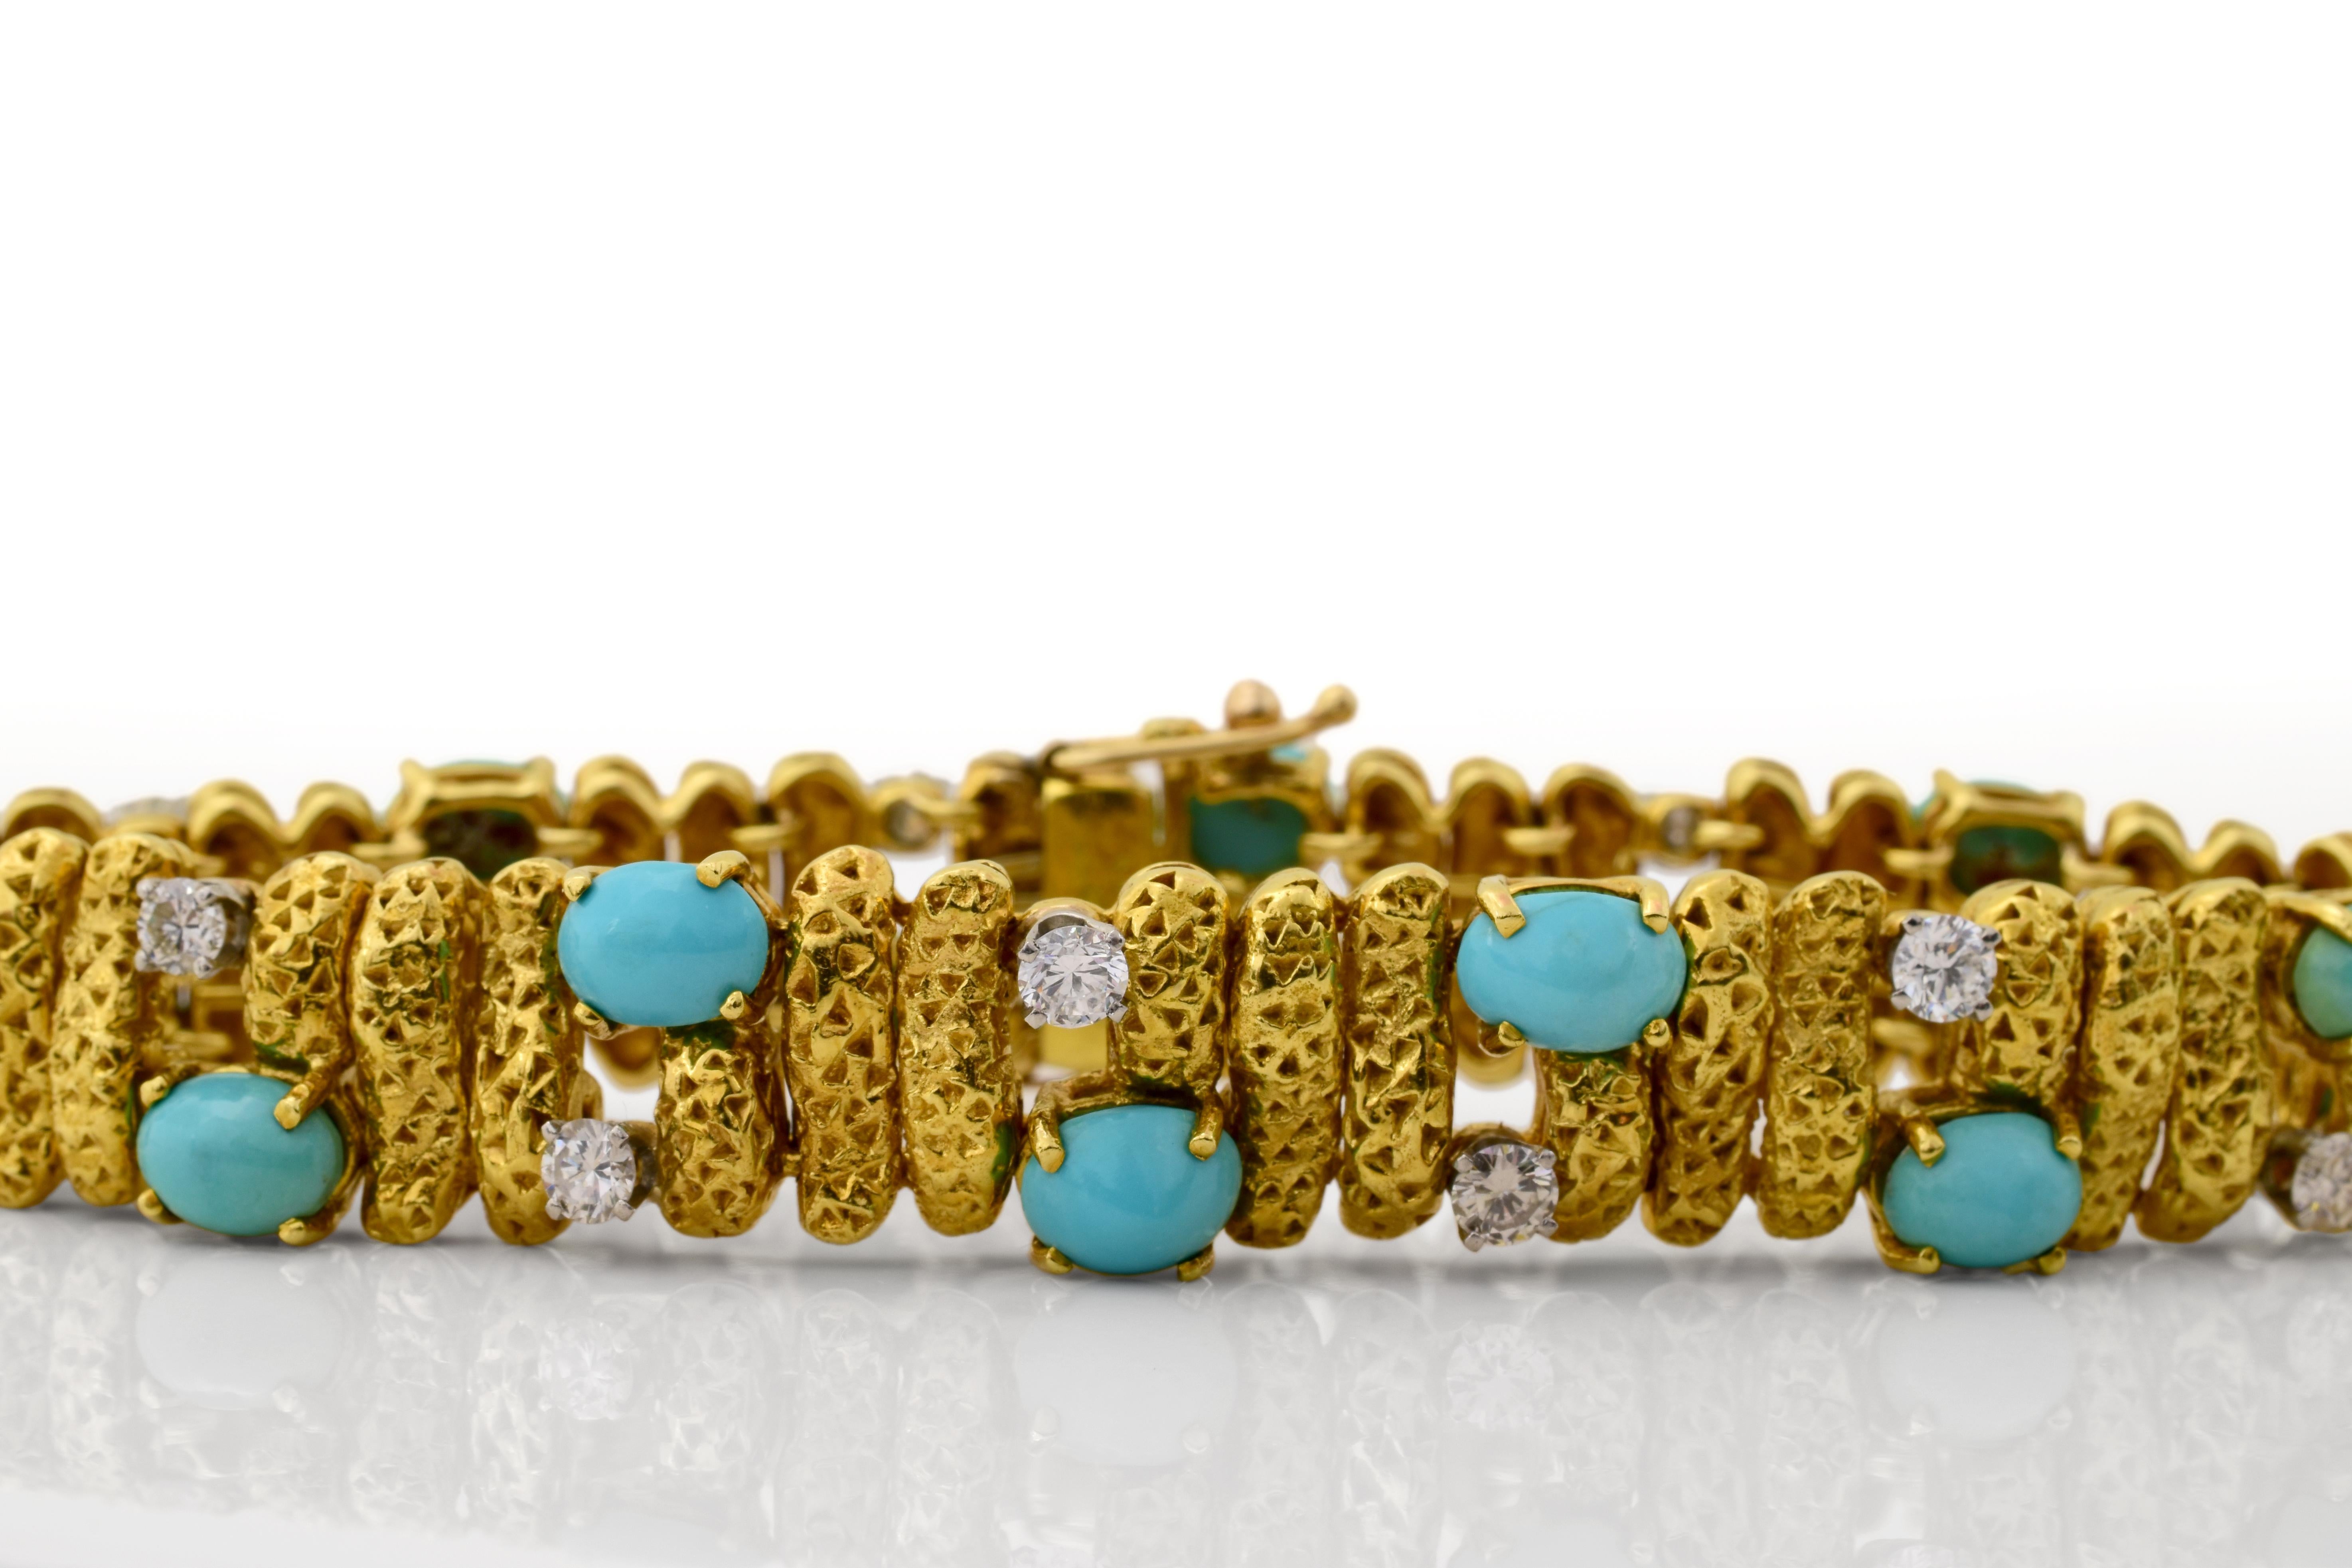 A vintage VCA, NY bracelet, circa 1960s. The bracelet features 18k yellow gold, turquoise, and diamonds. It is signed 